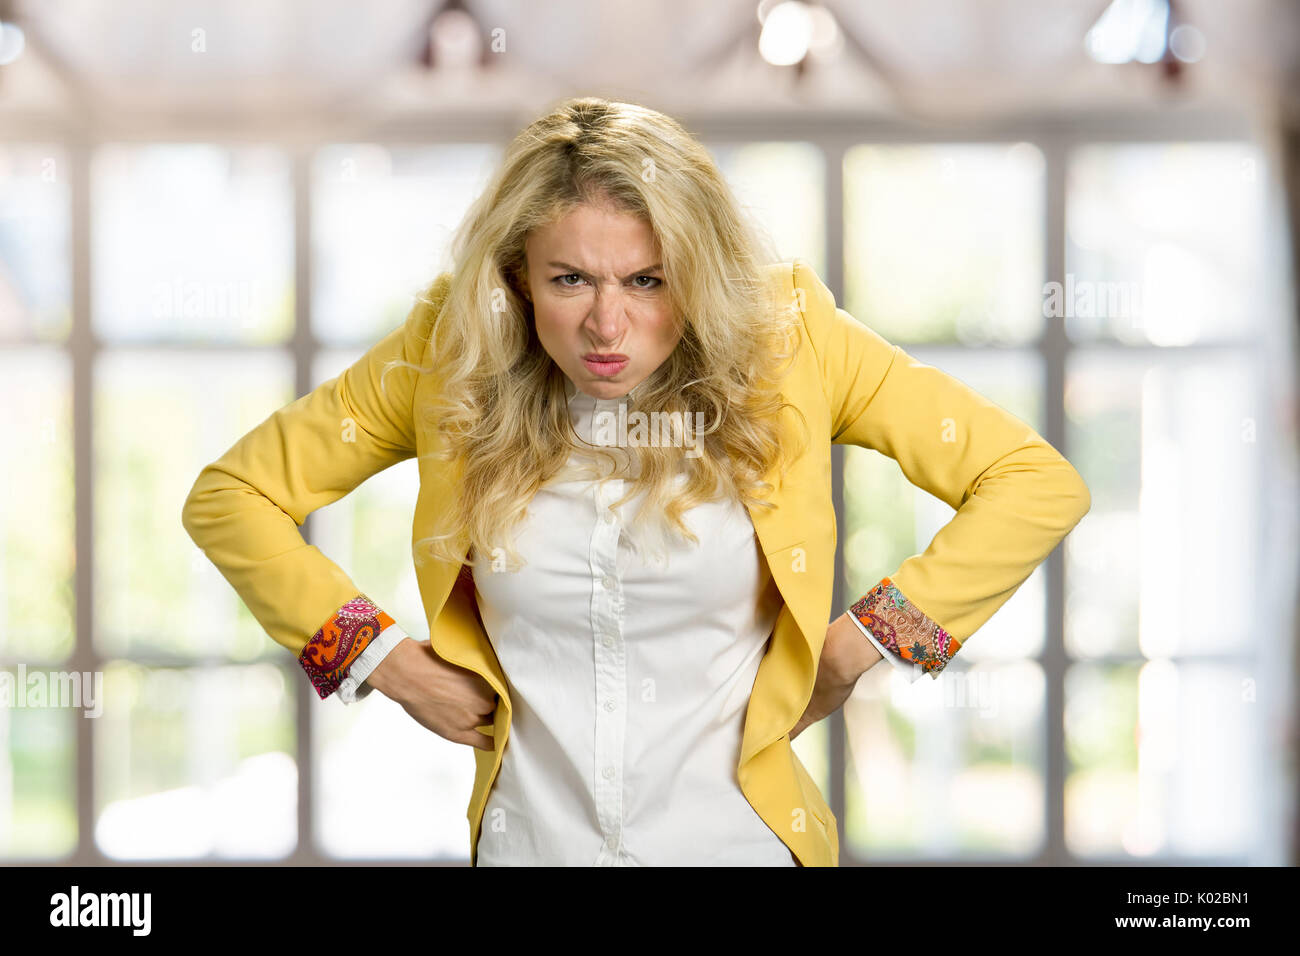 Aggressive frowning young blonde woman. Frustrated european woman in formal wear holding hands on hips with negative emotions, blurred background. Stock Photo